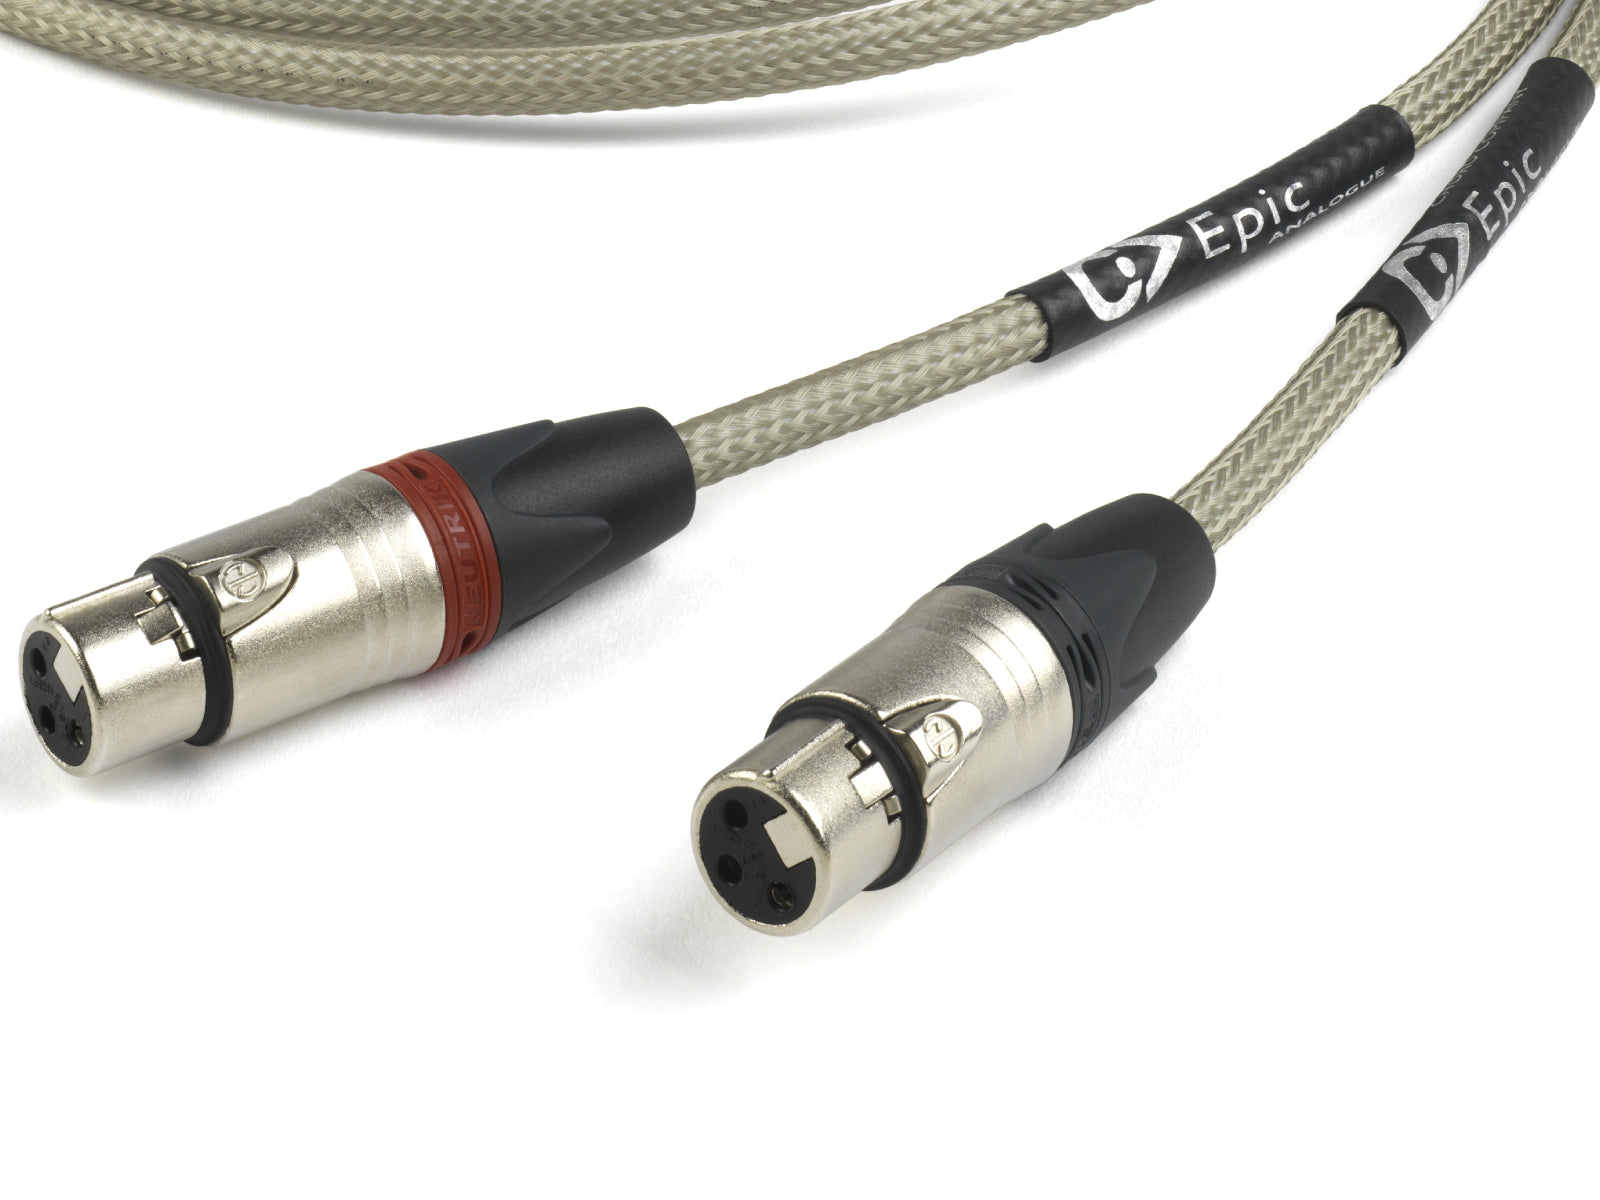 Chord Epic Analogue XLR (ChorAlloy plated)